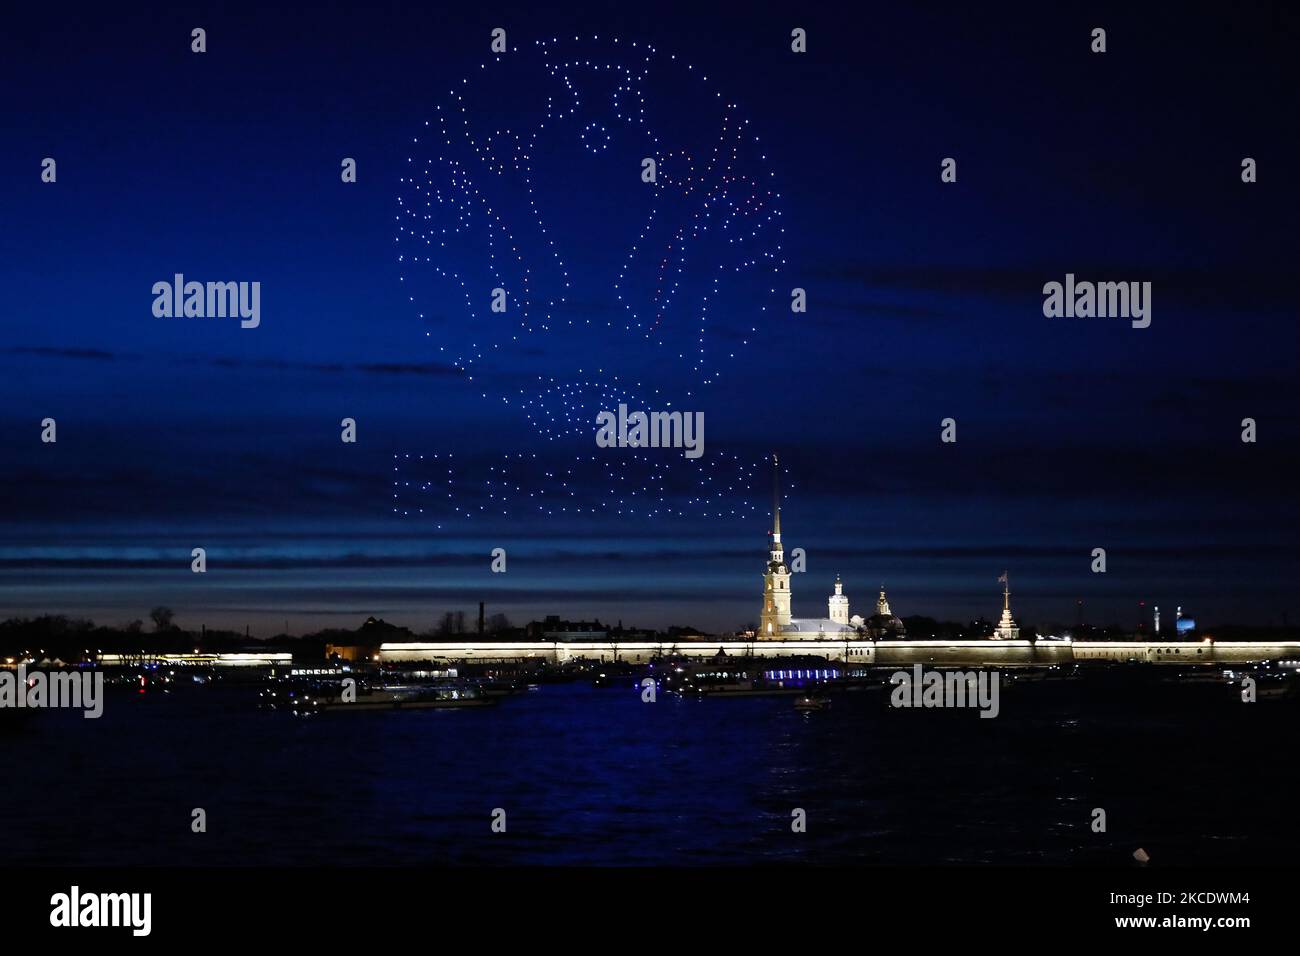 A drone swarm displays UEFA Euro 2020 logo in the night sky above the Peter and Paul (Petropavlovskaya) Fortress on May 2, 2021 in Saint Petersburg, Russia. (Photo by Mike Kireev/NurPhoto) Stock Photo